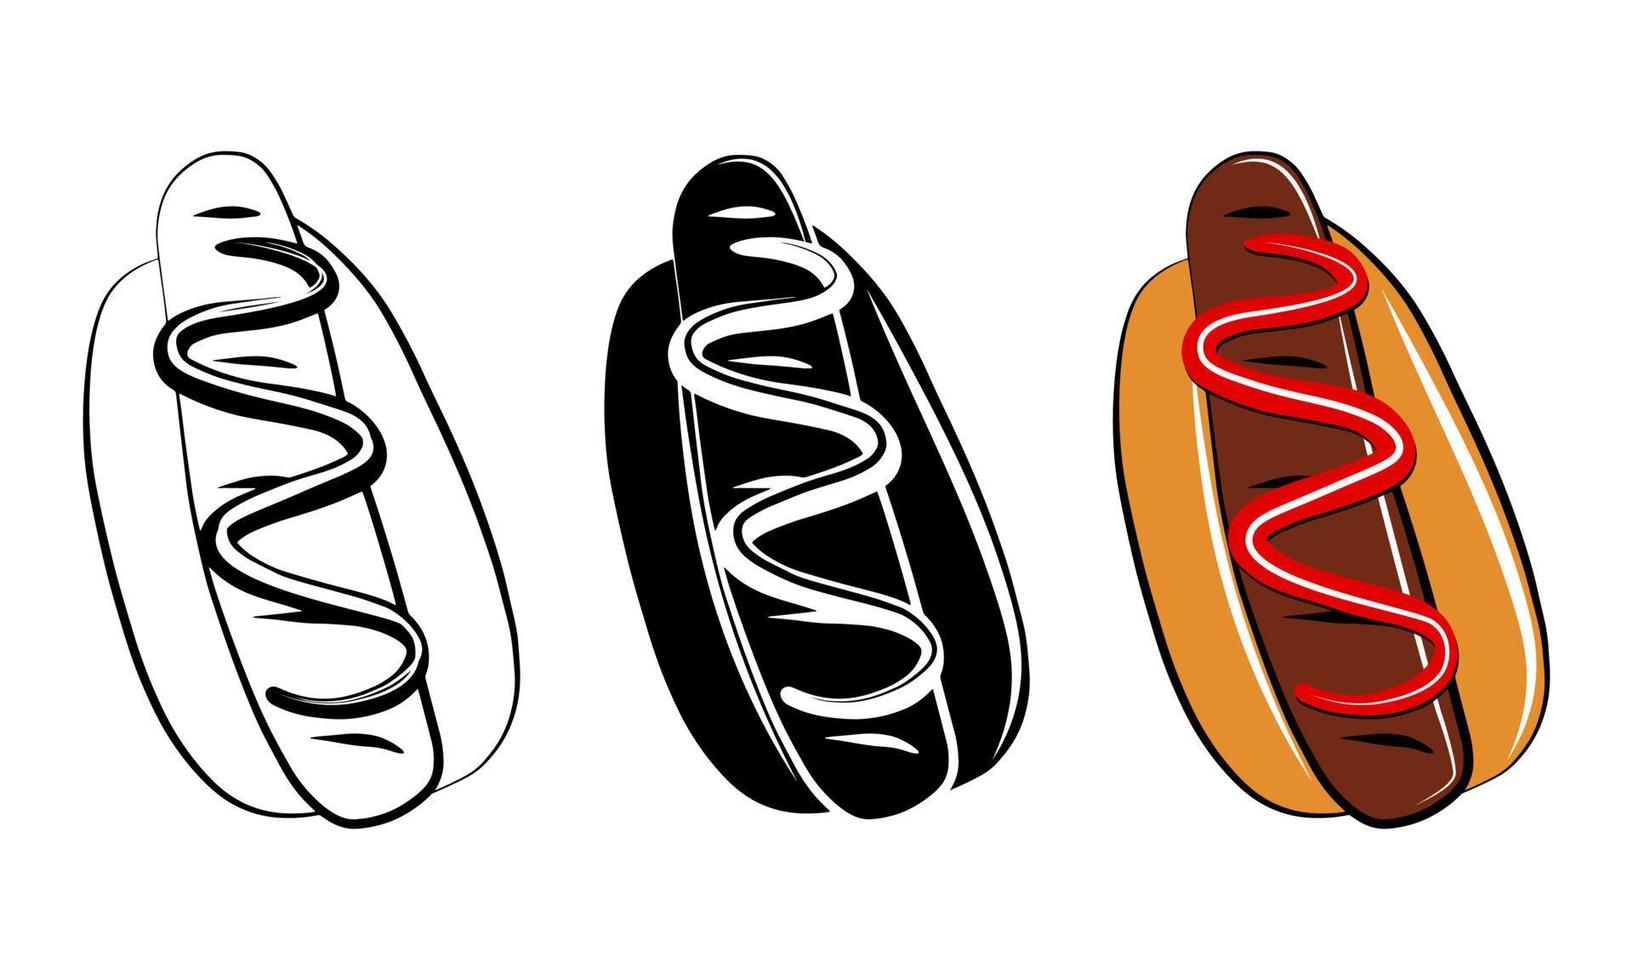 Hot dog isolated vector icon. Fast food cartoon outline sketch set. Package logo design element. Street unhealthy food. Tasty meal print. Simple emblem template. Graphic monochrome symbol. Menu sign.